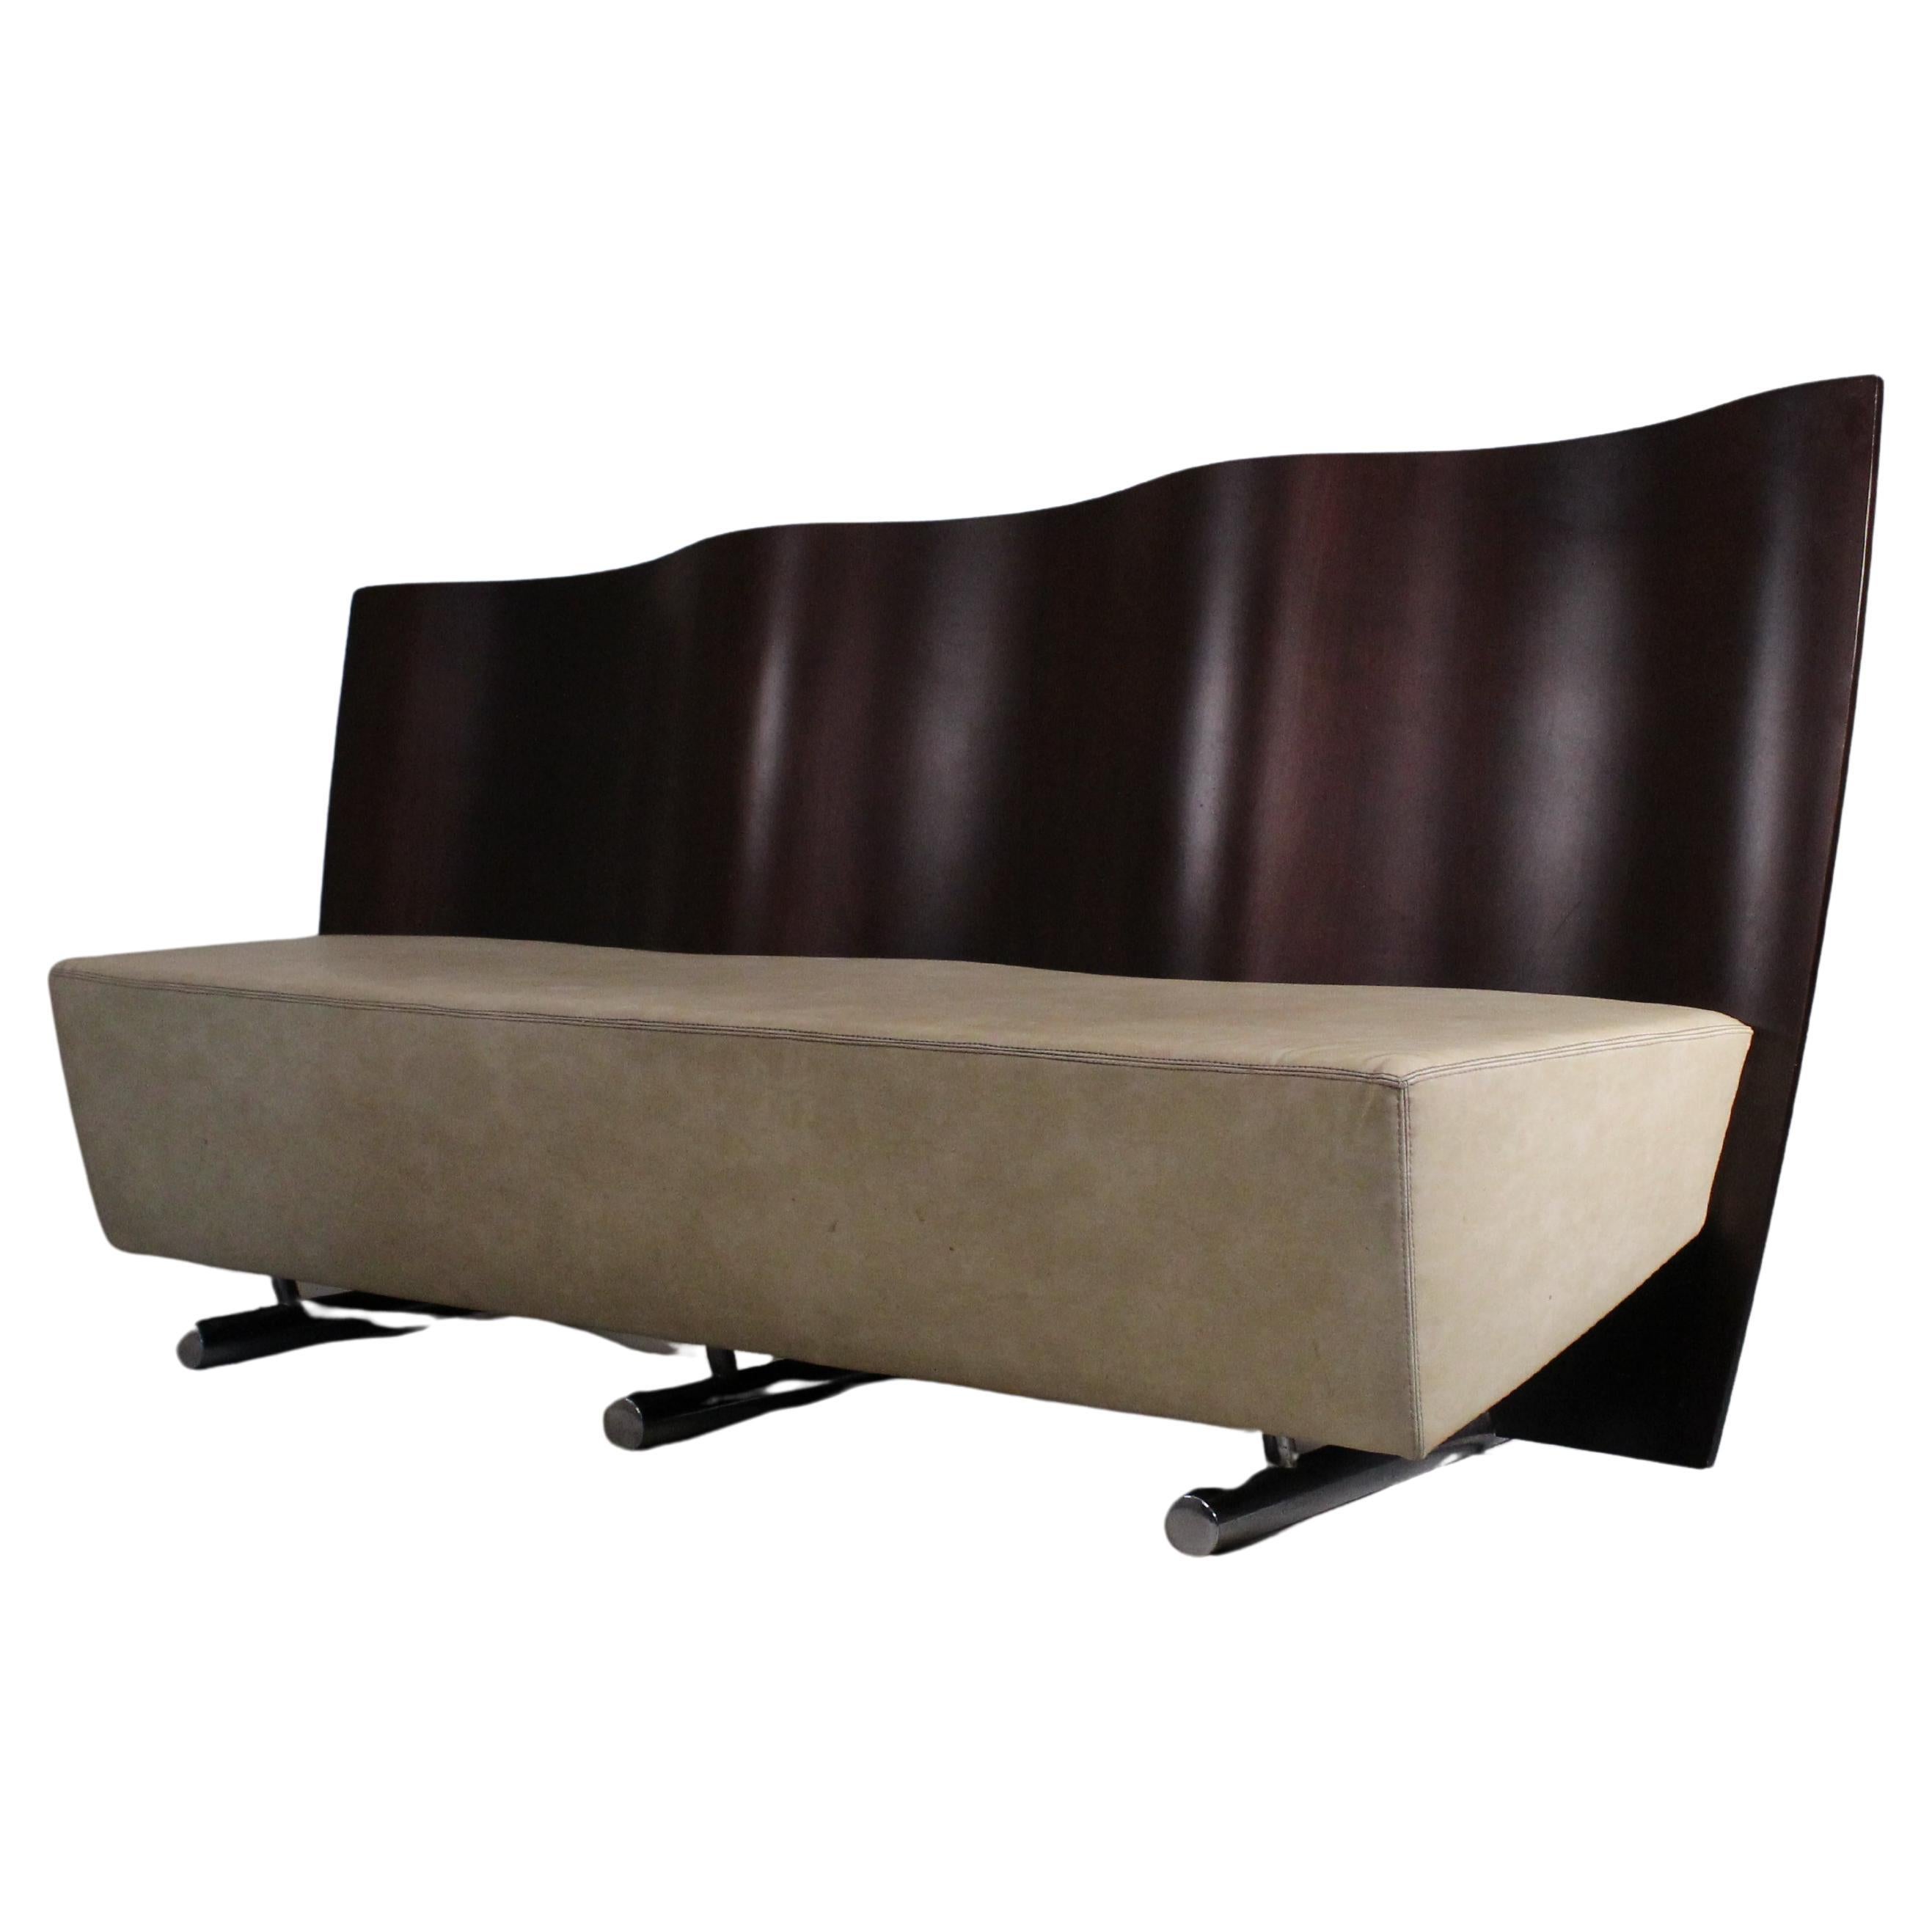 Post-modern sofa, wood and leather